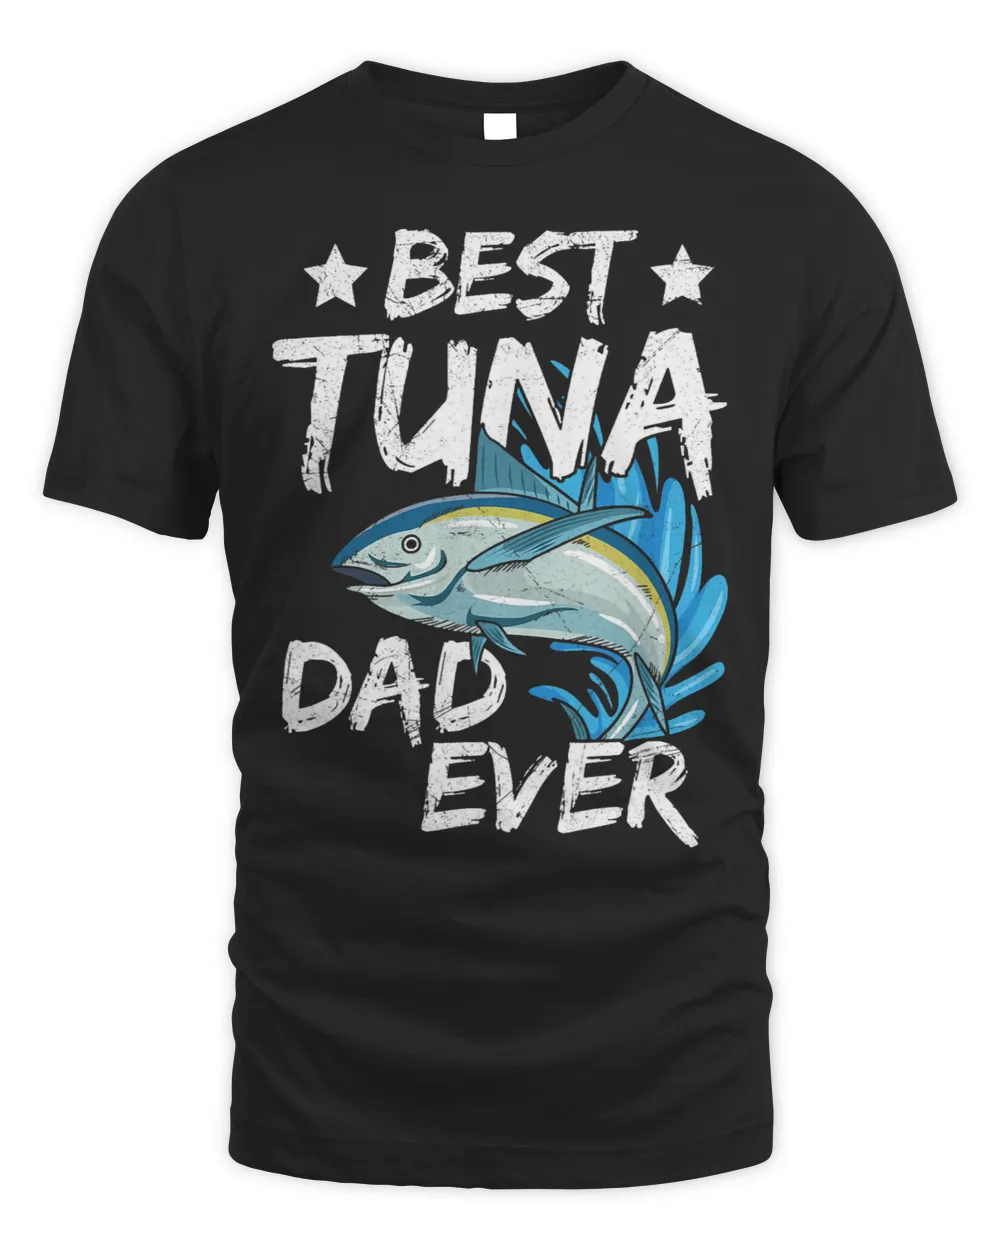 Mens Best tuna Dad ever Design for your Tuna Dad